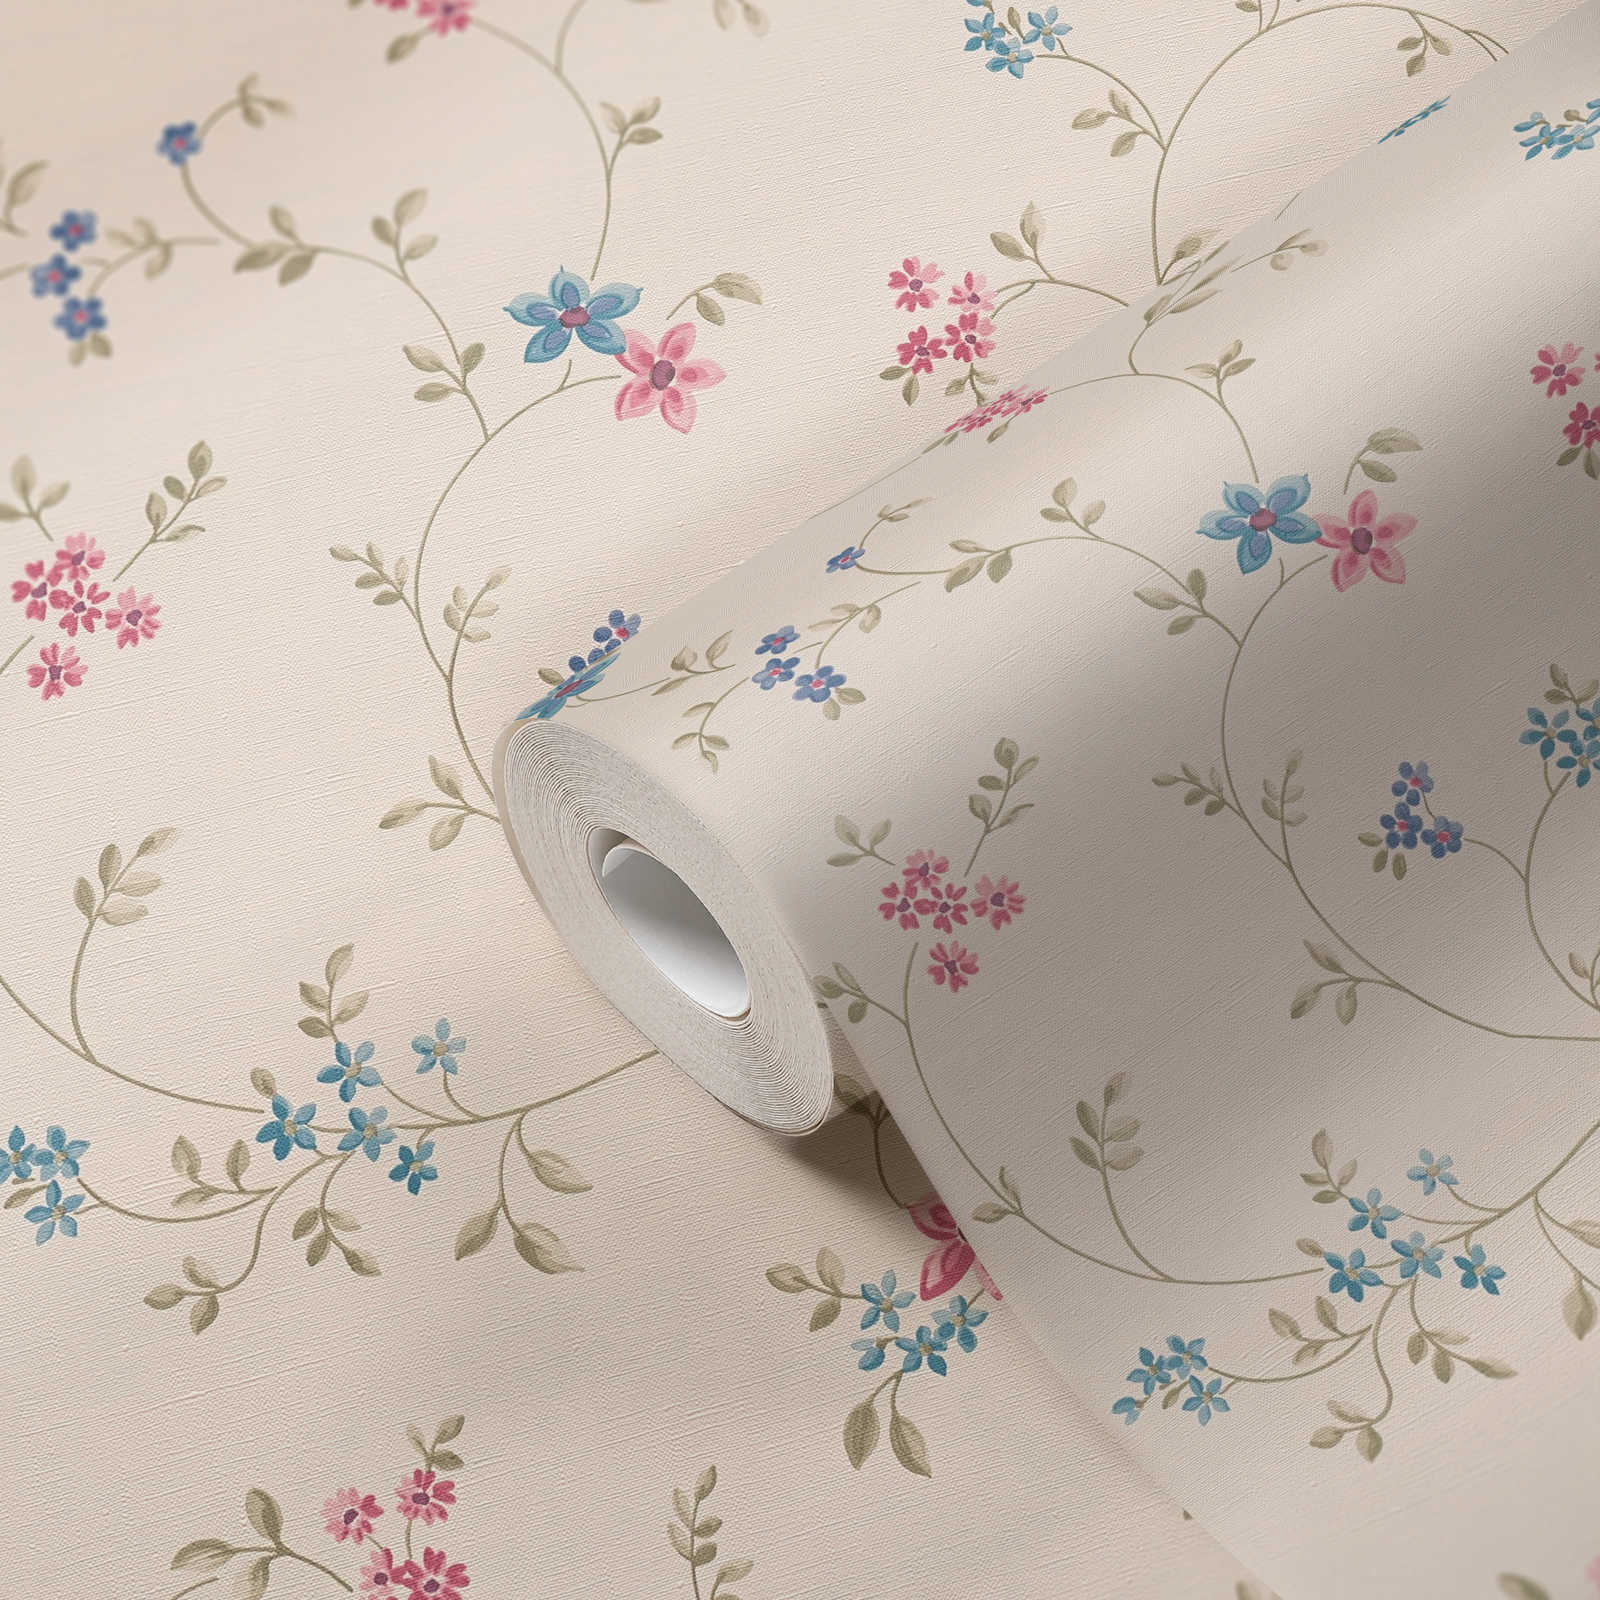             Non-woven wallpaper with floral tendrils - cream, green, pink
        